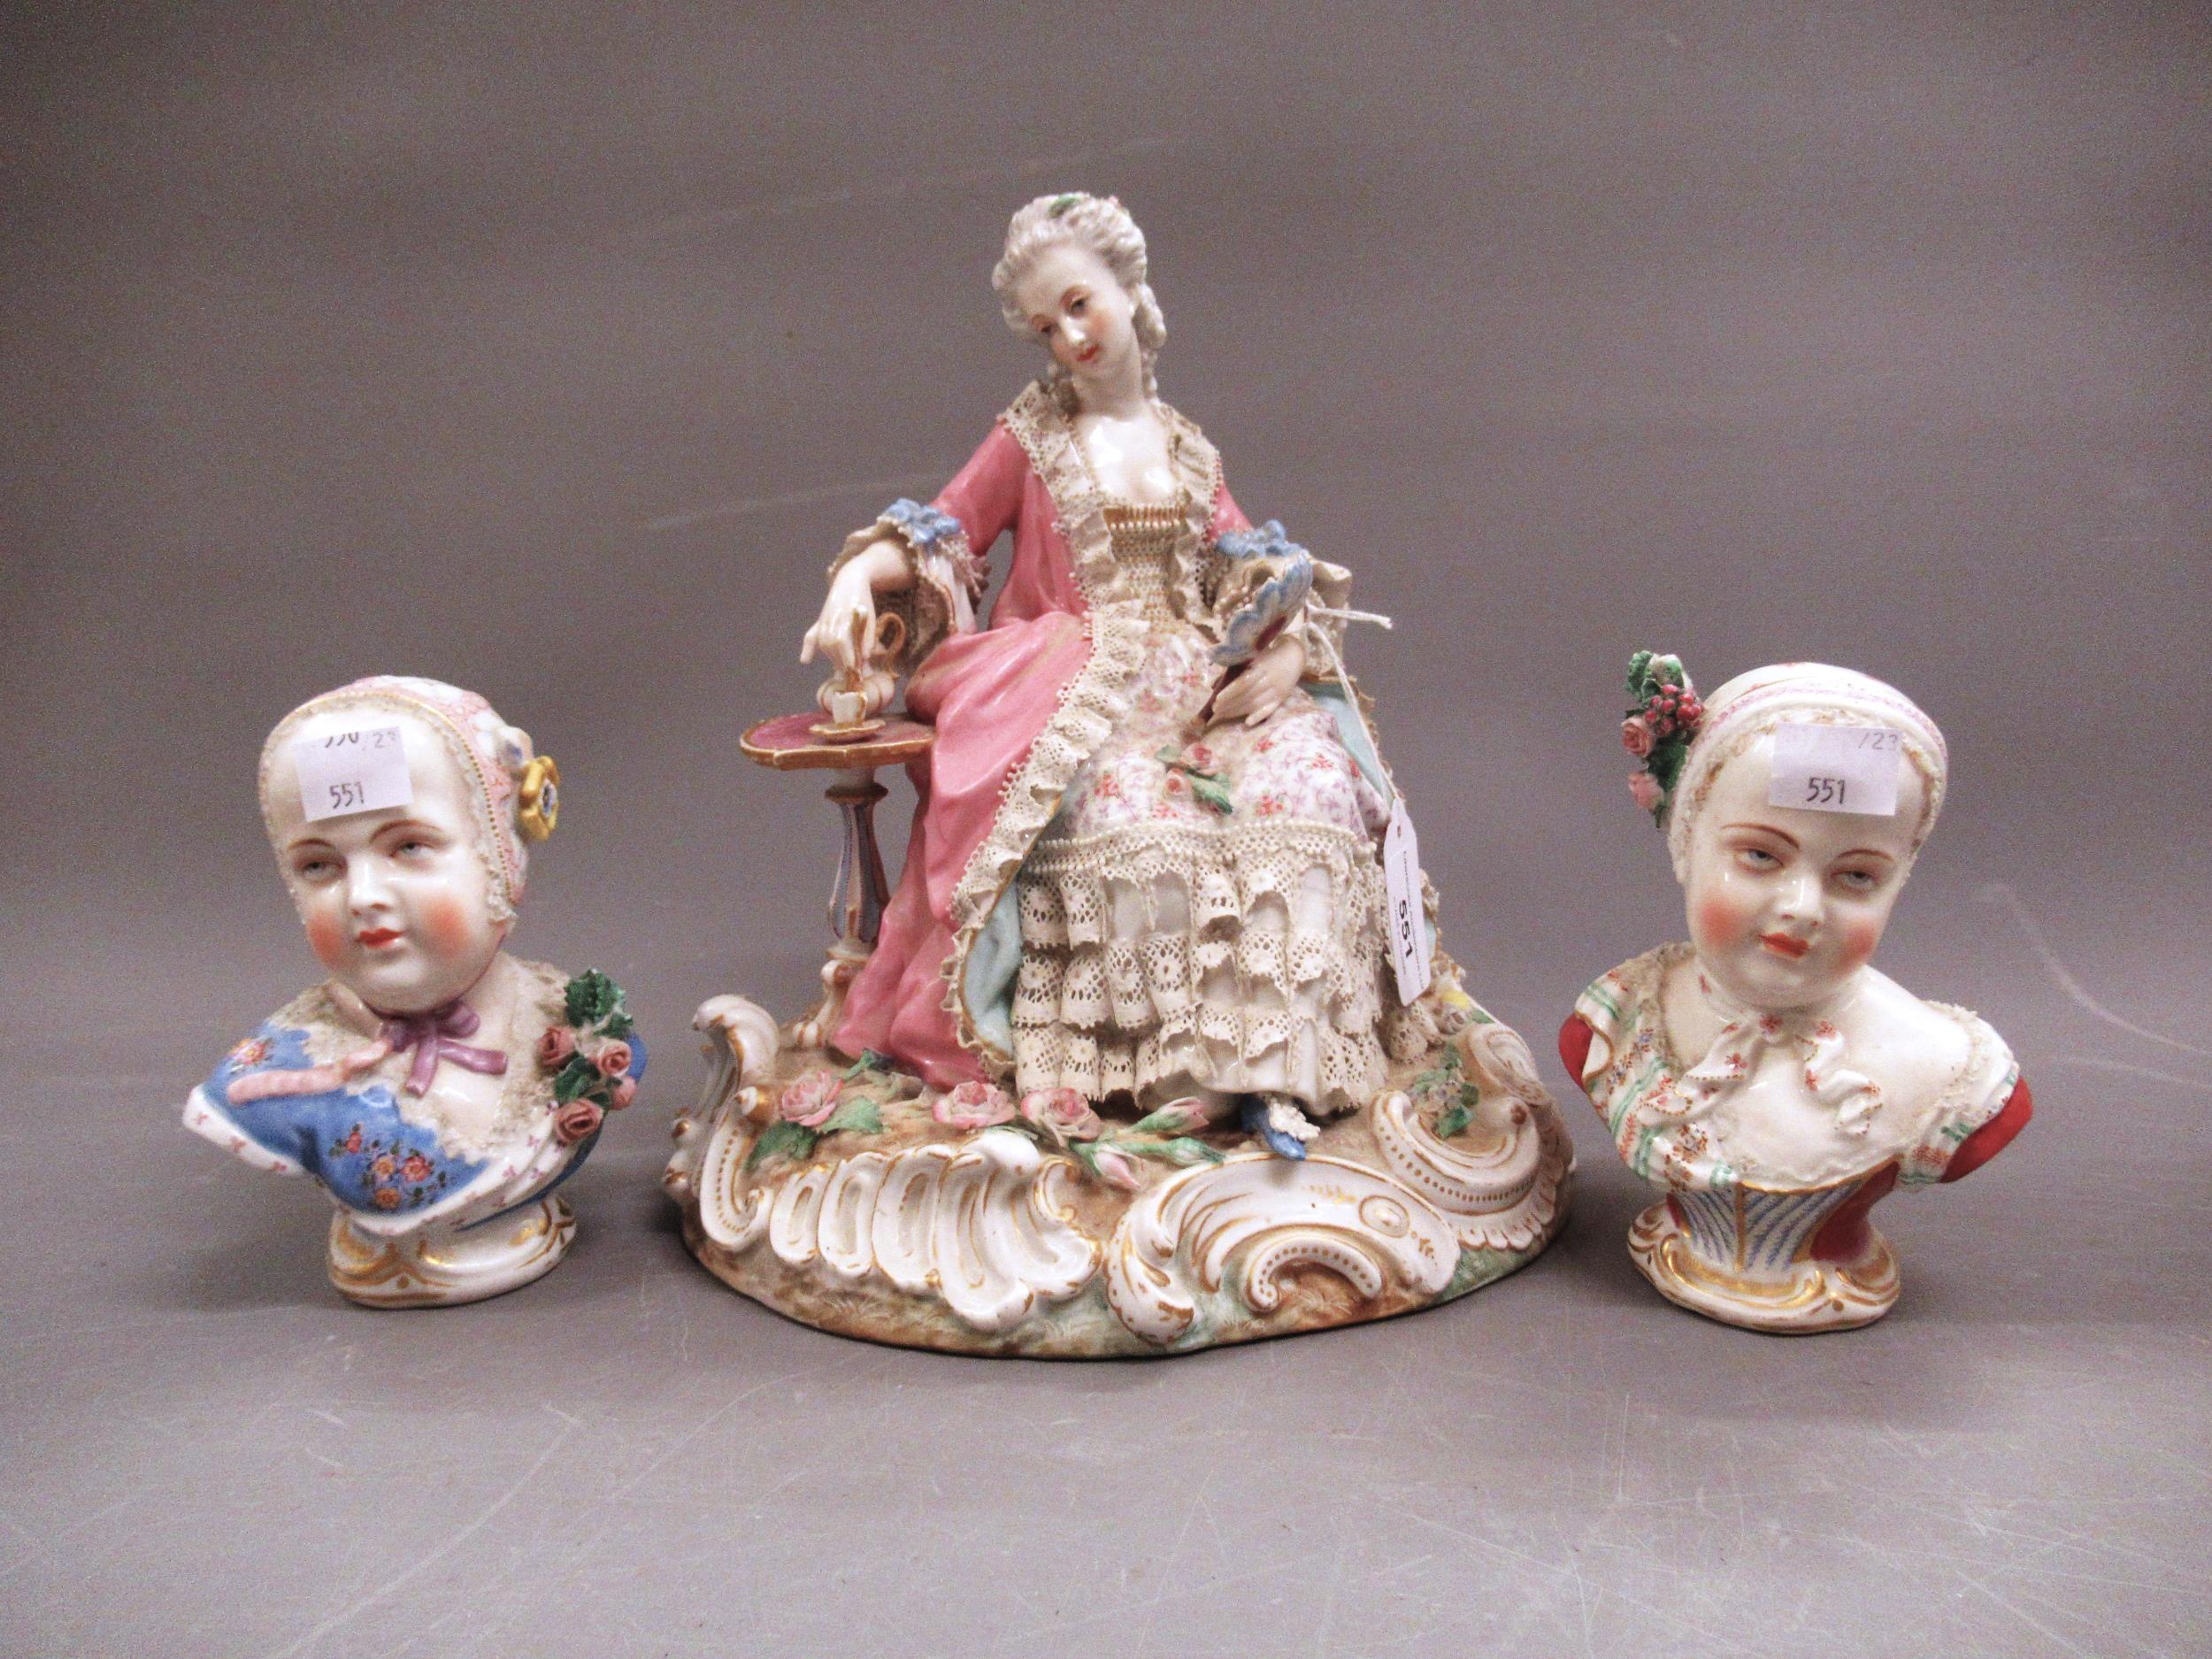 19th Century Continental porcelain figure of a seated lady wearing a lace dress, 24cms high together